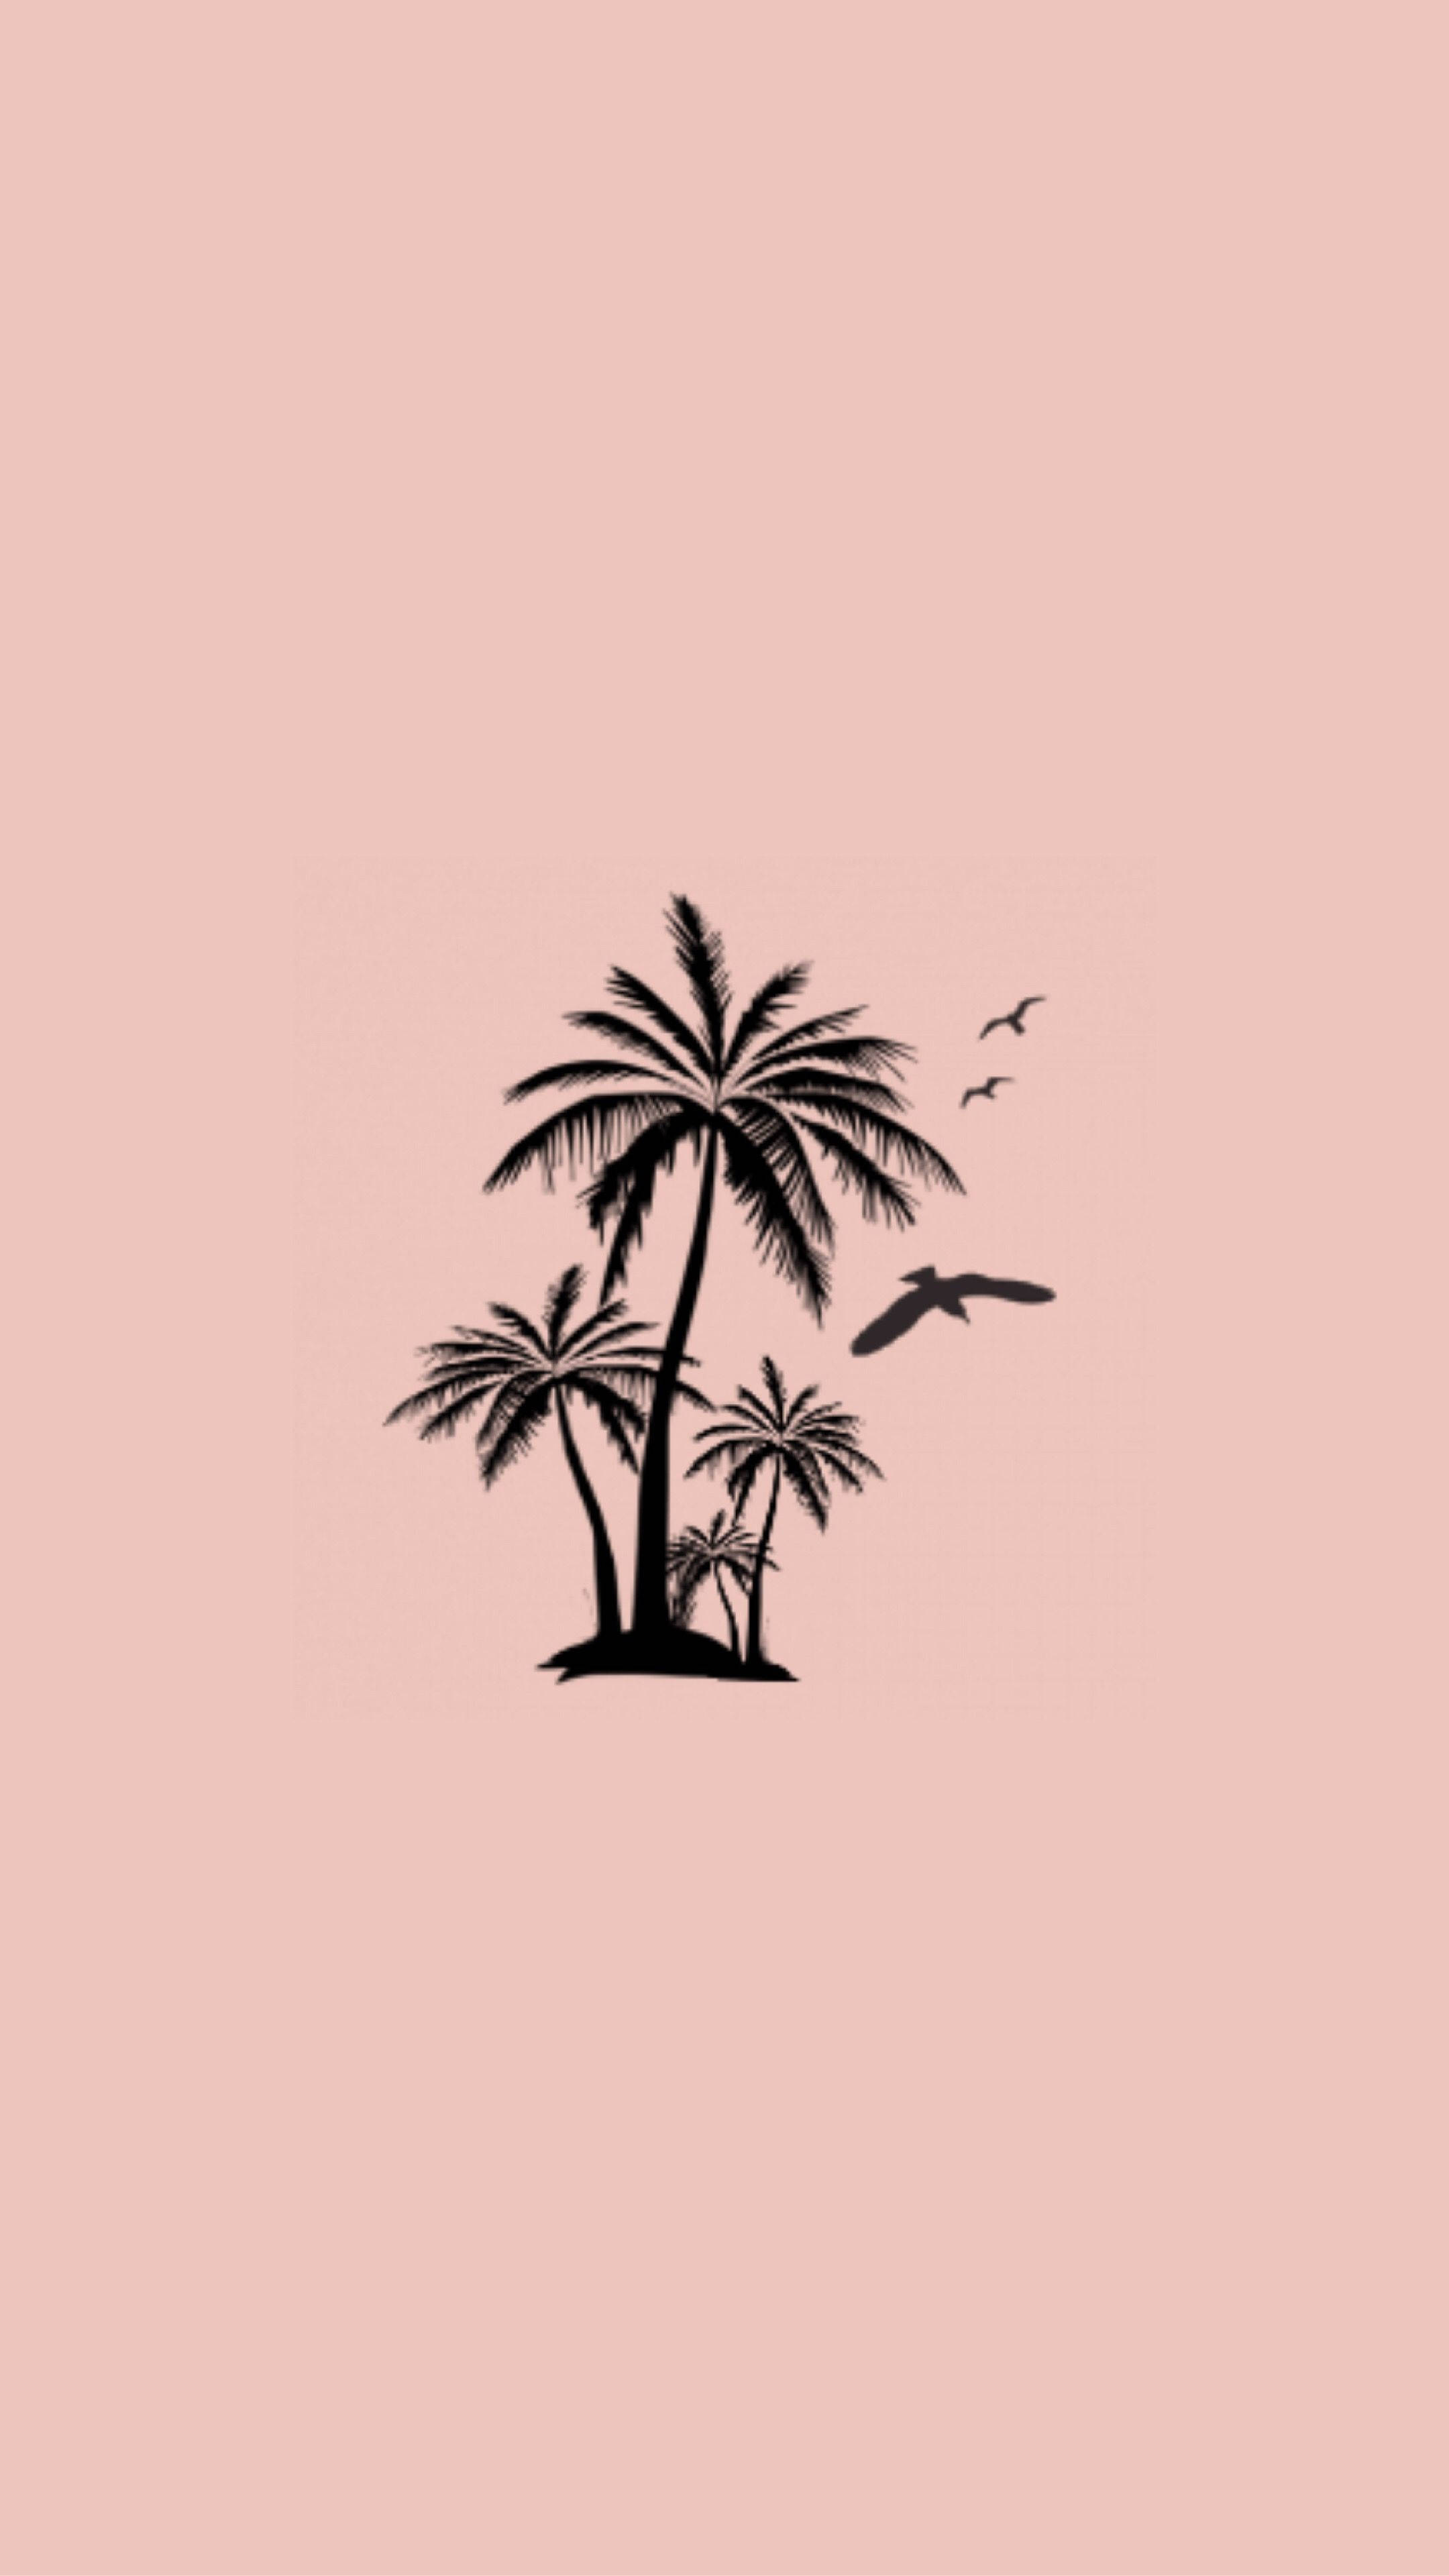 Minimalist Girly Aesthetic Profile Picture Of Palm Trees And Flying Birds In Black Shade On A Plain Pink Background